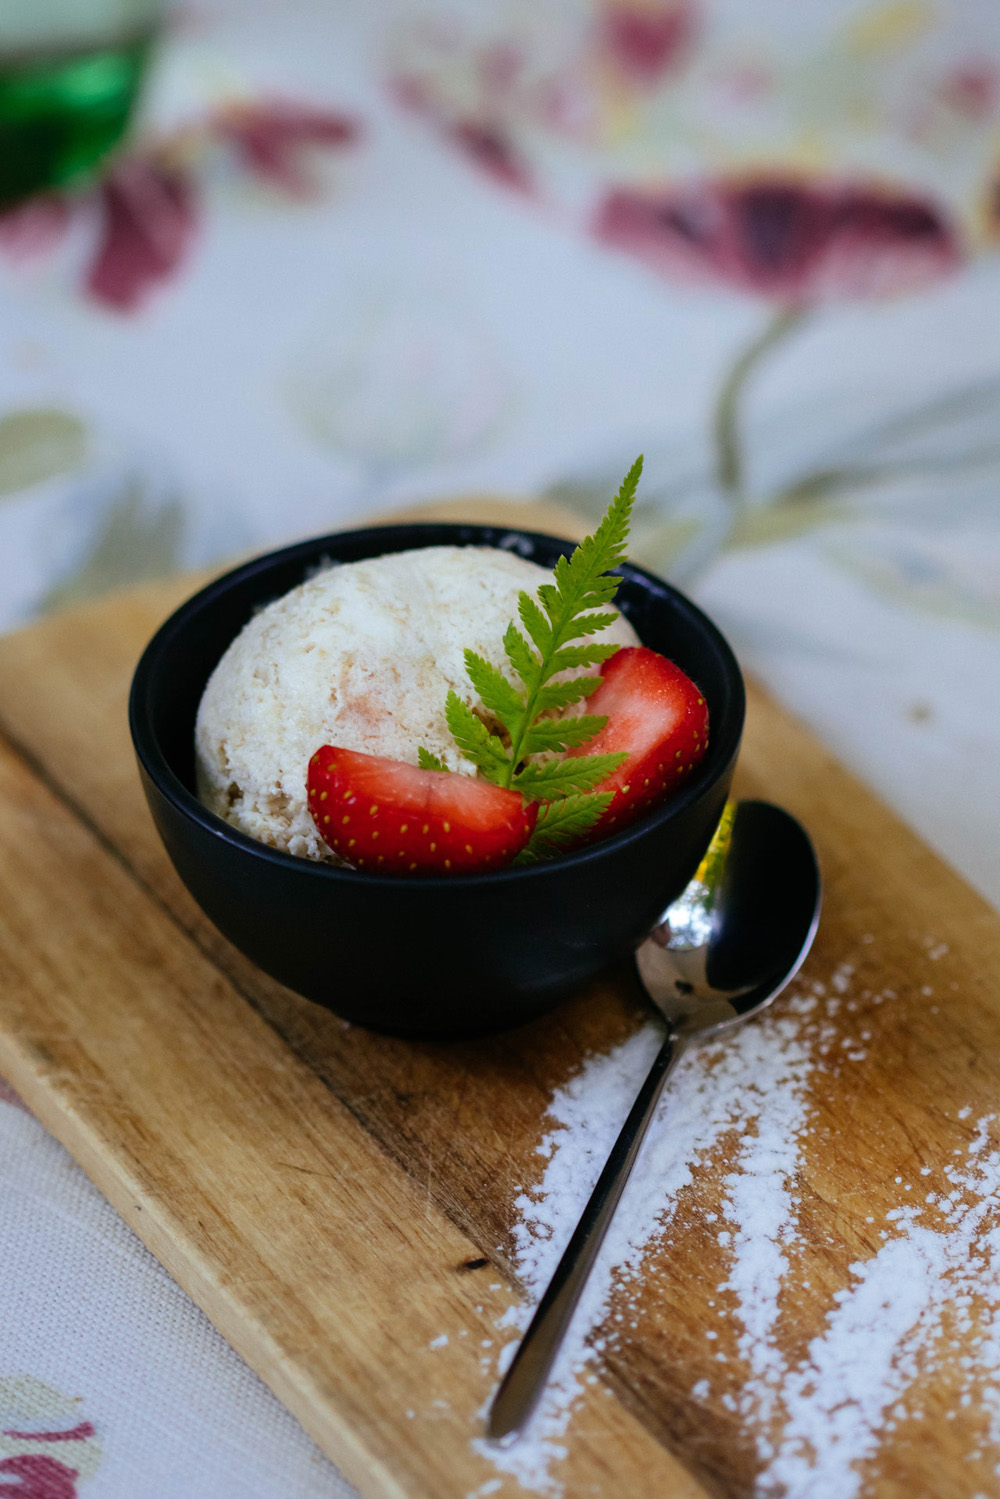 An easy way to make low-fat vegan ice cream that tastes delicious